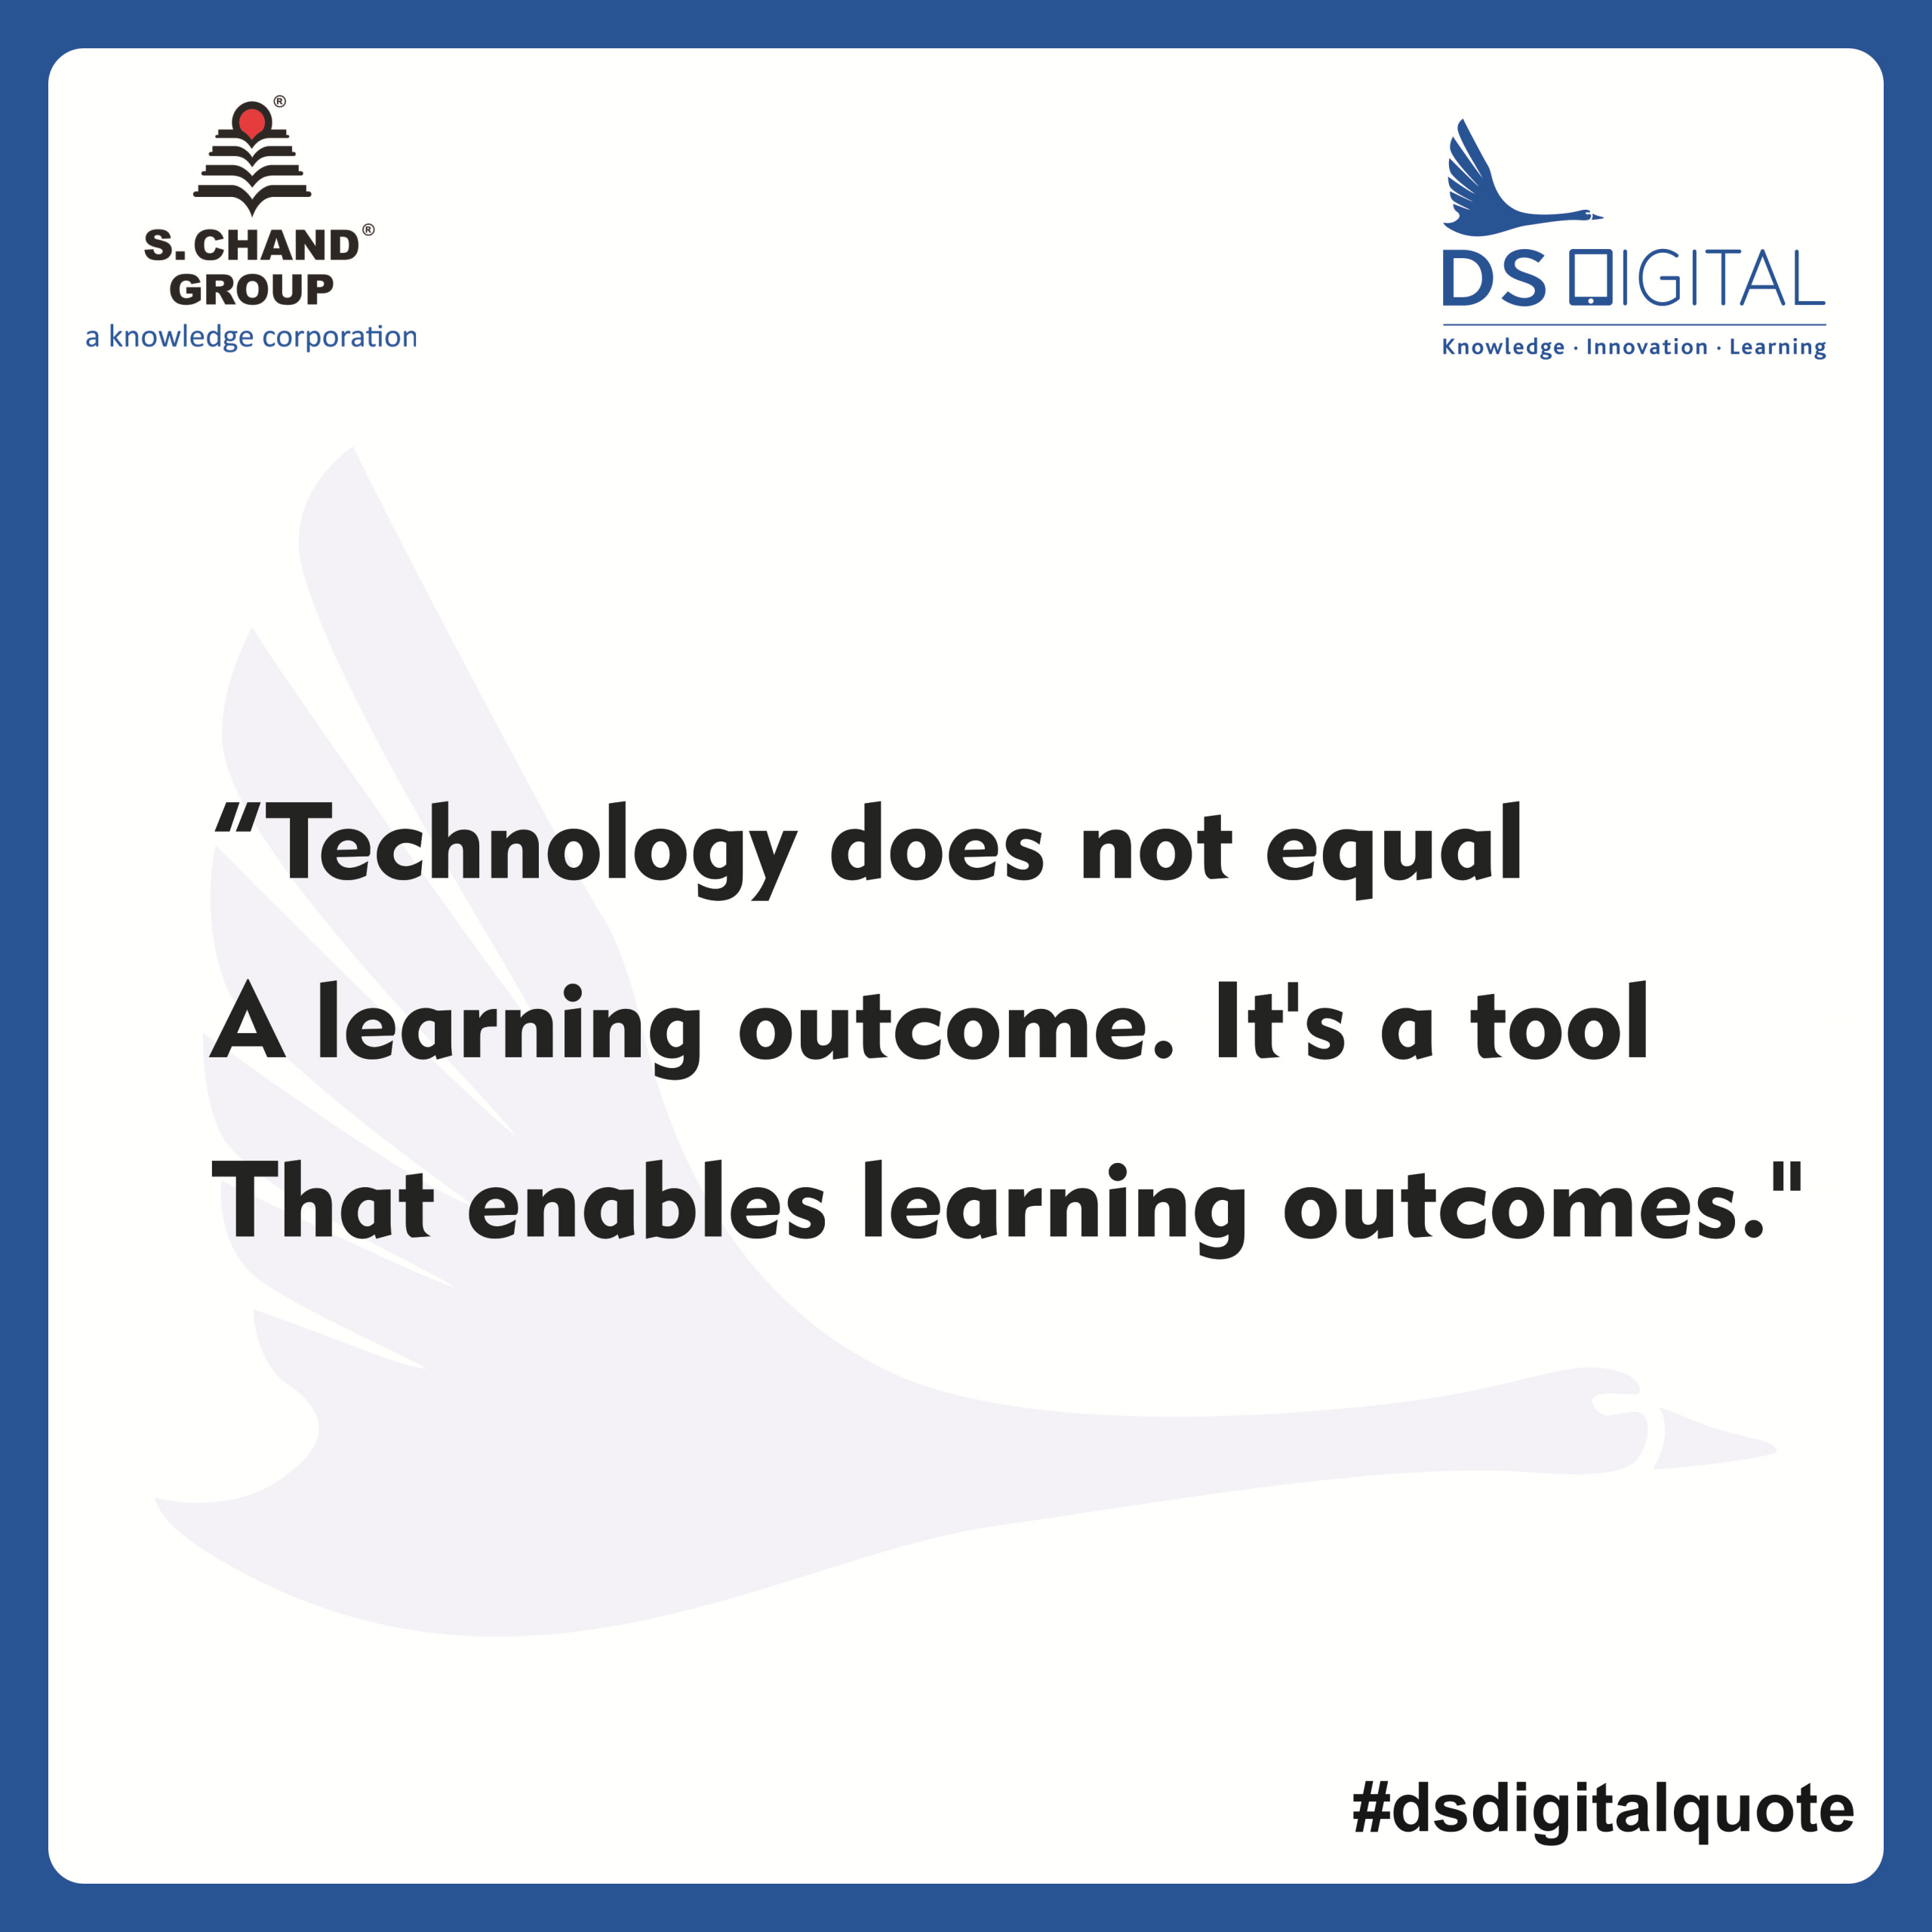 Educational Technology Quotes
 digital education quotes 12 DS Digital